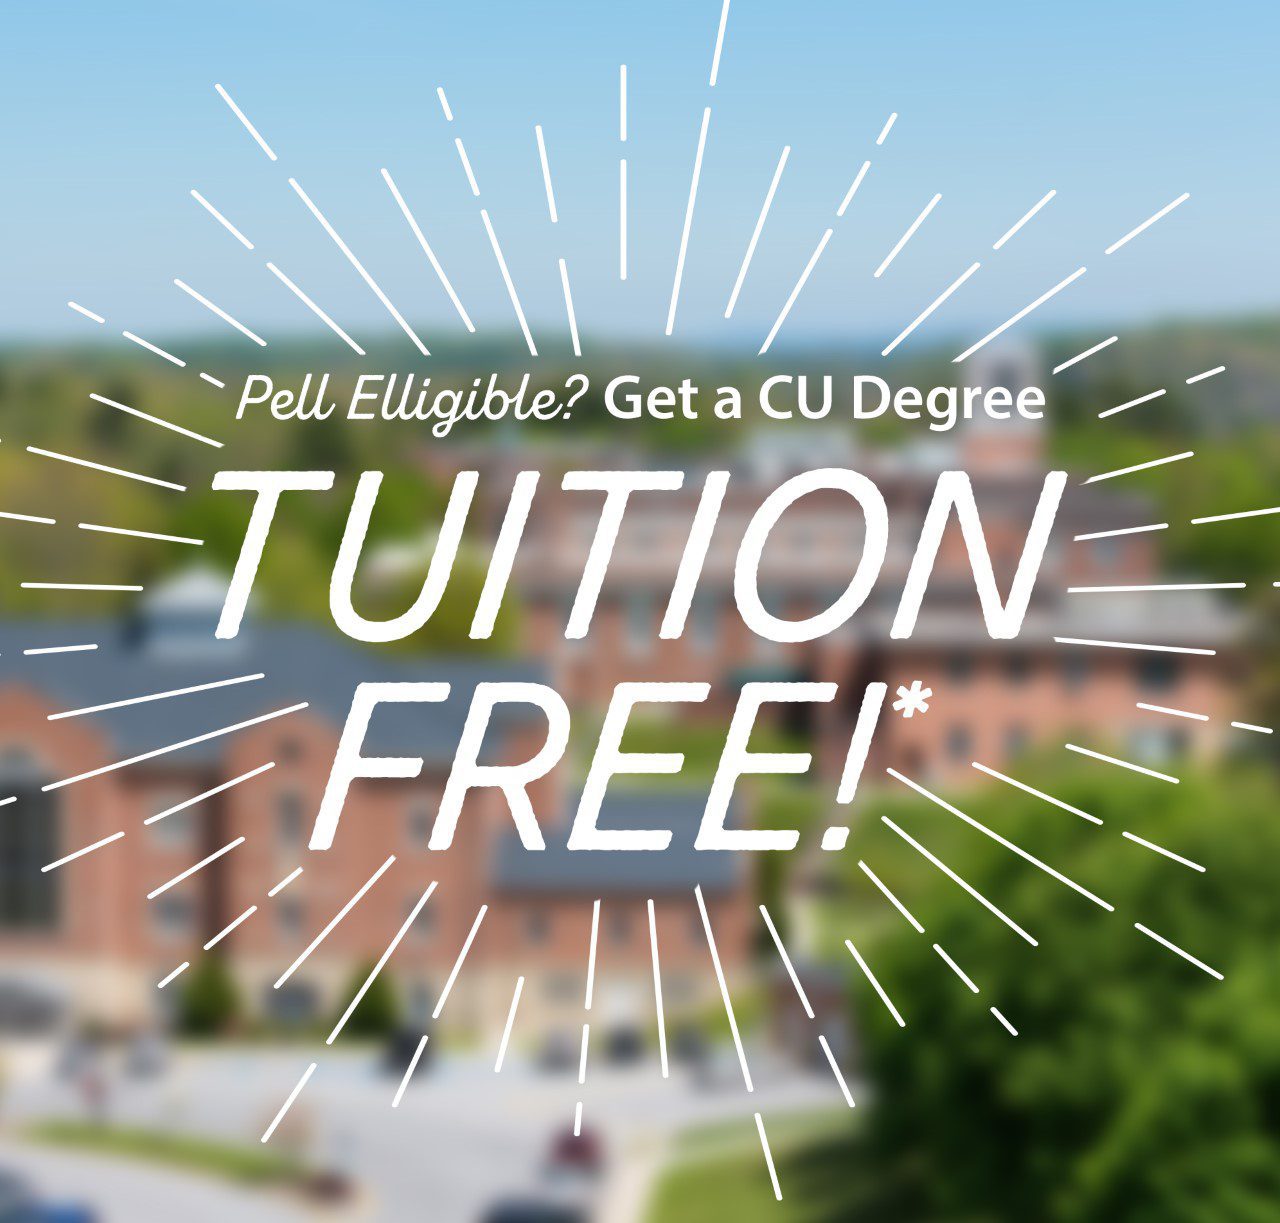 Pell Eligible? Get a CU Degree Tuition Free! *